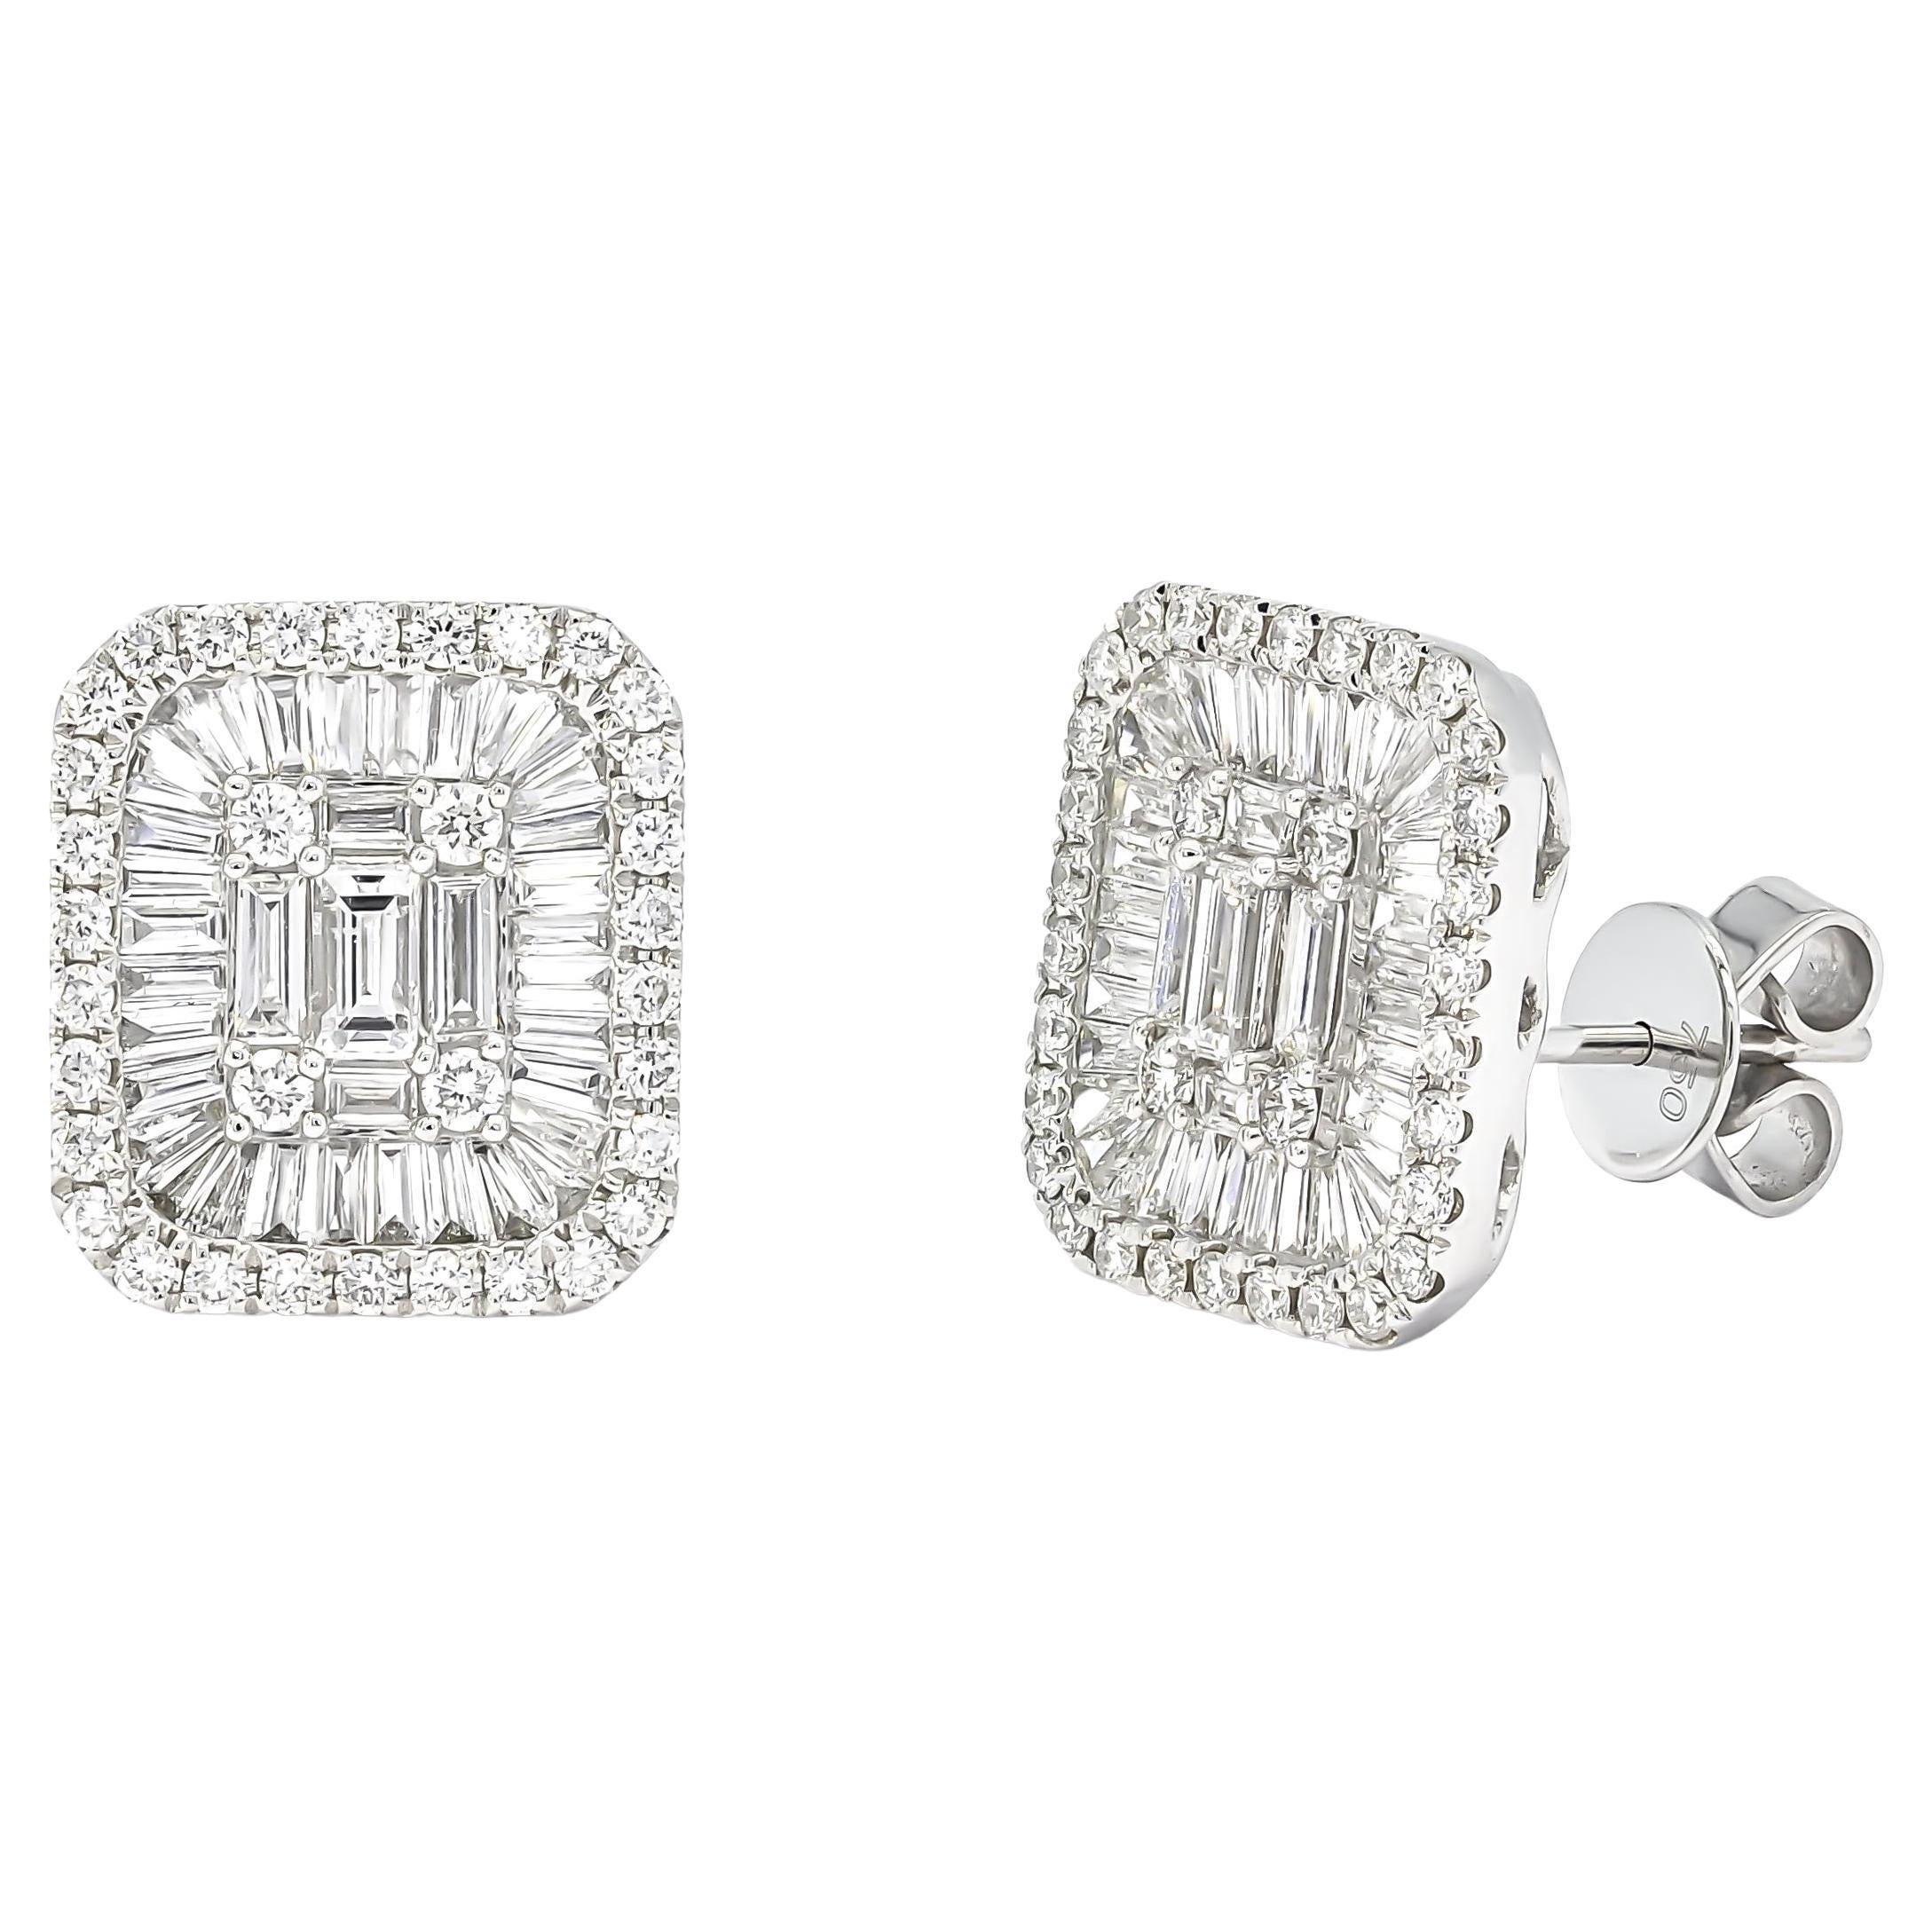  Natural Diamonds 1.80 CTS 18 Karat White Gold  Halo Cluster Stud Earrings